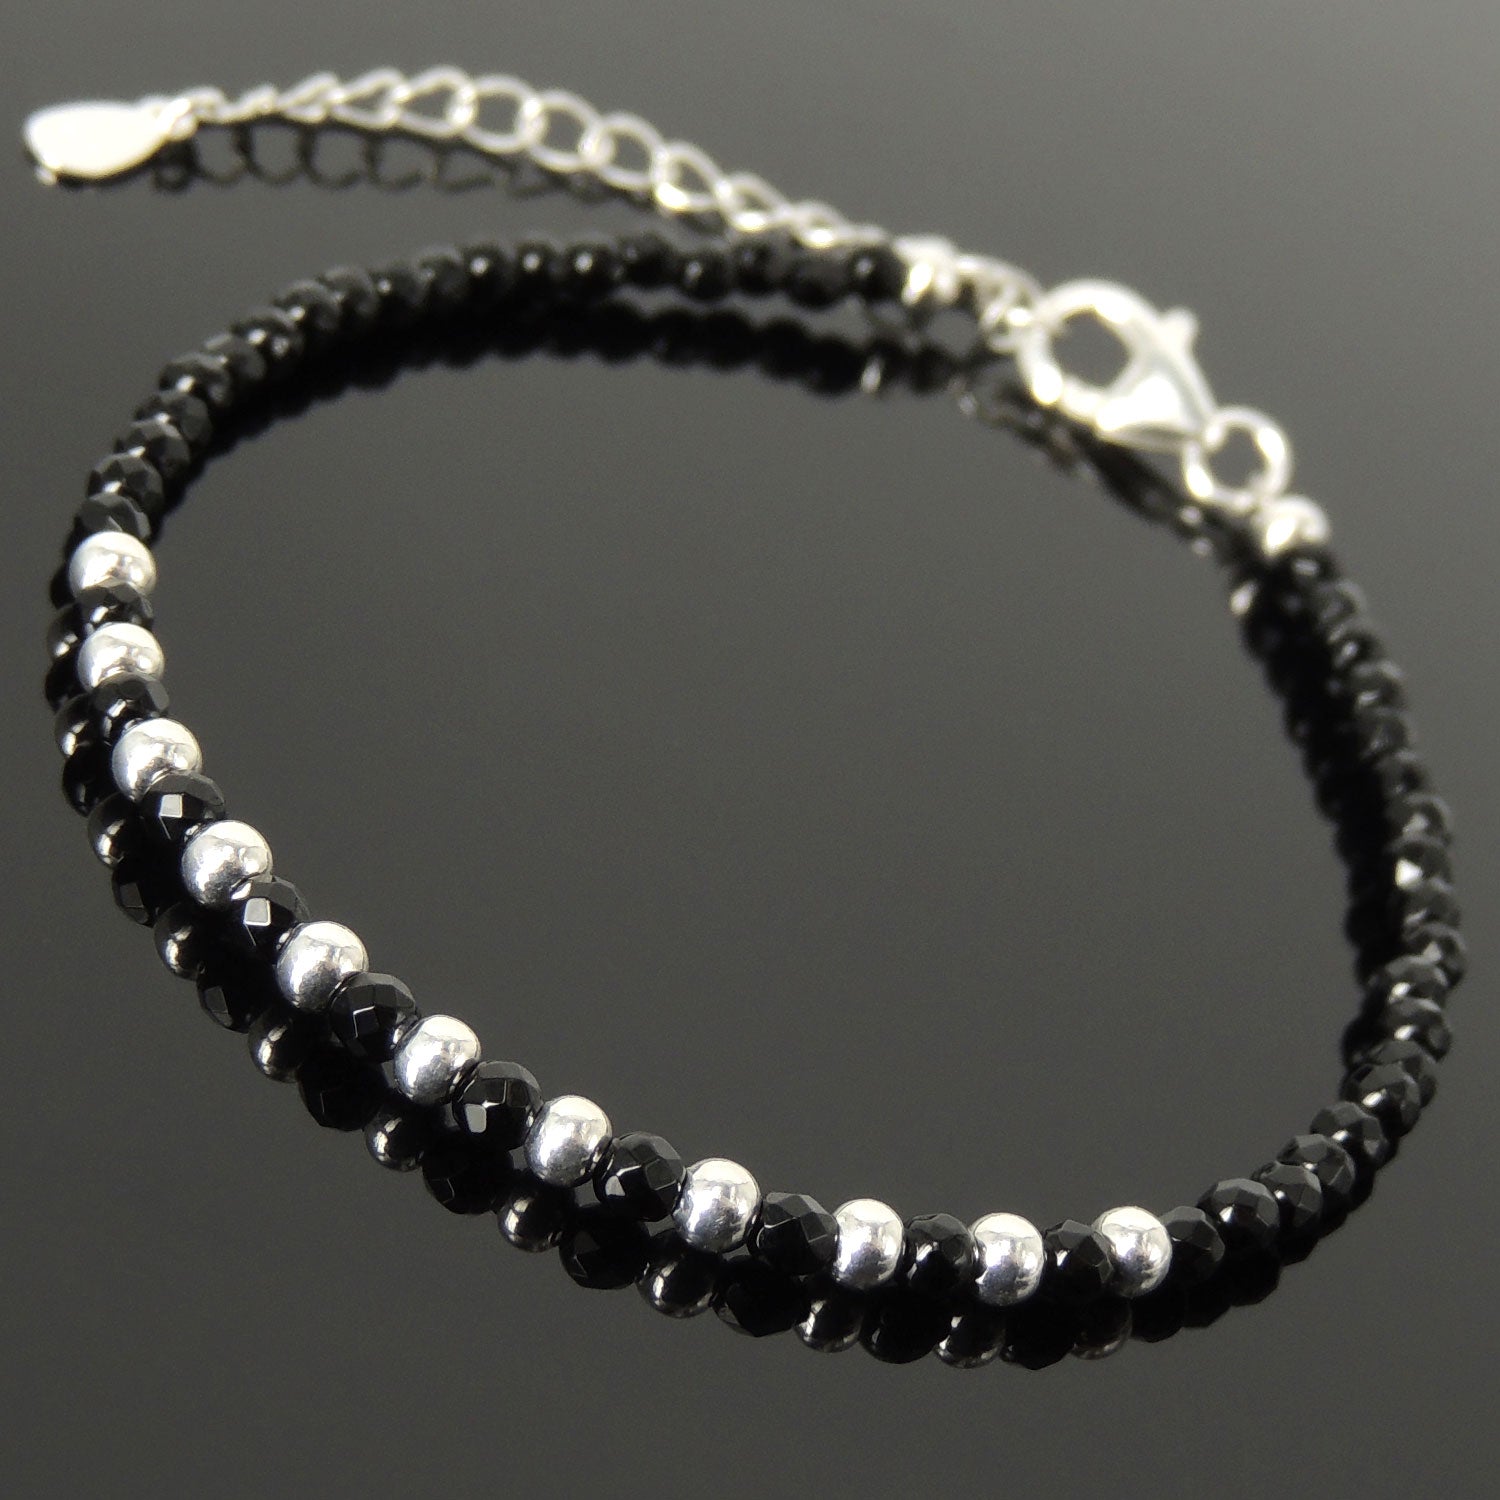 Handmade Adjustable Clasp Bracelet - 3mm Faceted Black Onyx Healing Protection Gemstone Beads, Men's Women's Custom Jewelry, Genuine S925 Sterling Silver Chain BR1794